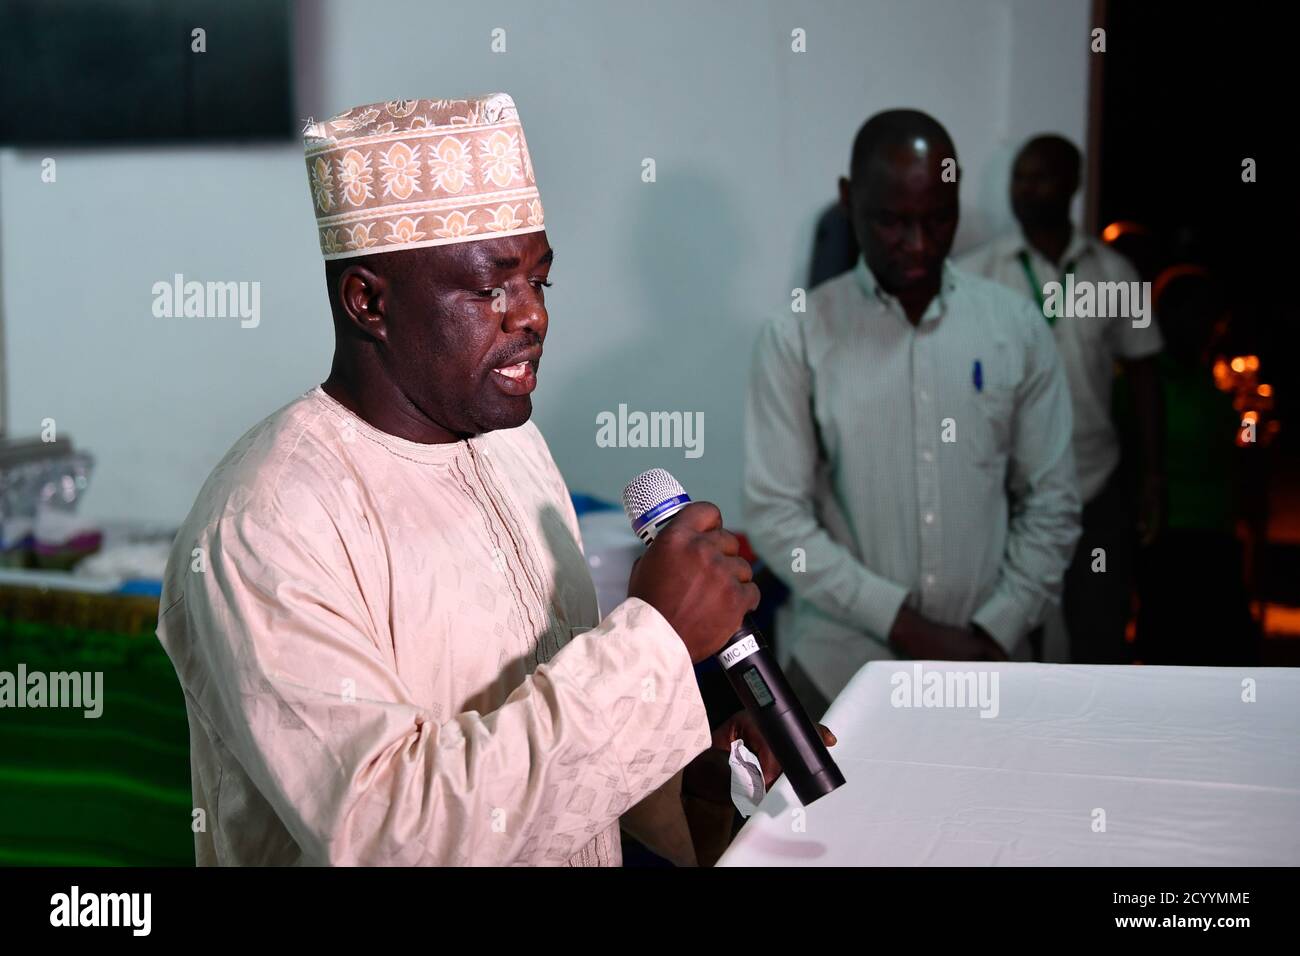 AMISOM Police Imam, DSP Abubakar Ringim leads a prayer at a dinner hosted for AMISOM Muslim personnel to mark Eid ul Adha in Mogadishu, Somalia on August 11, 2019.  Eidul Adha is an important religious holiday celebrated by Muslims all around the world. Stock Photo